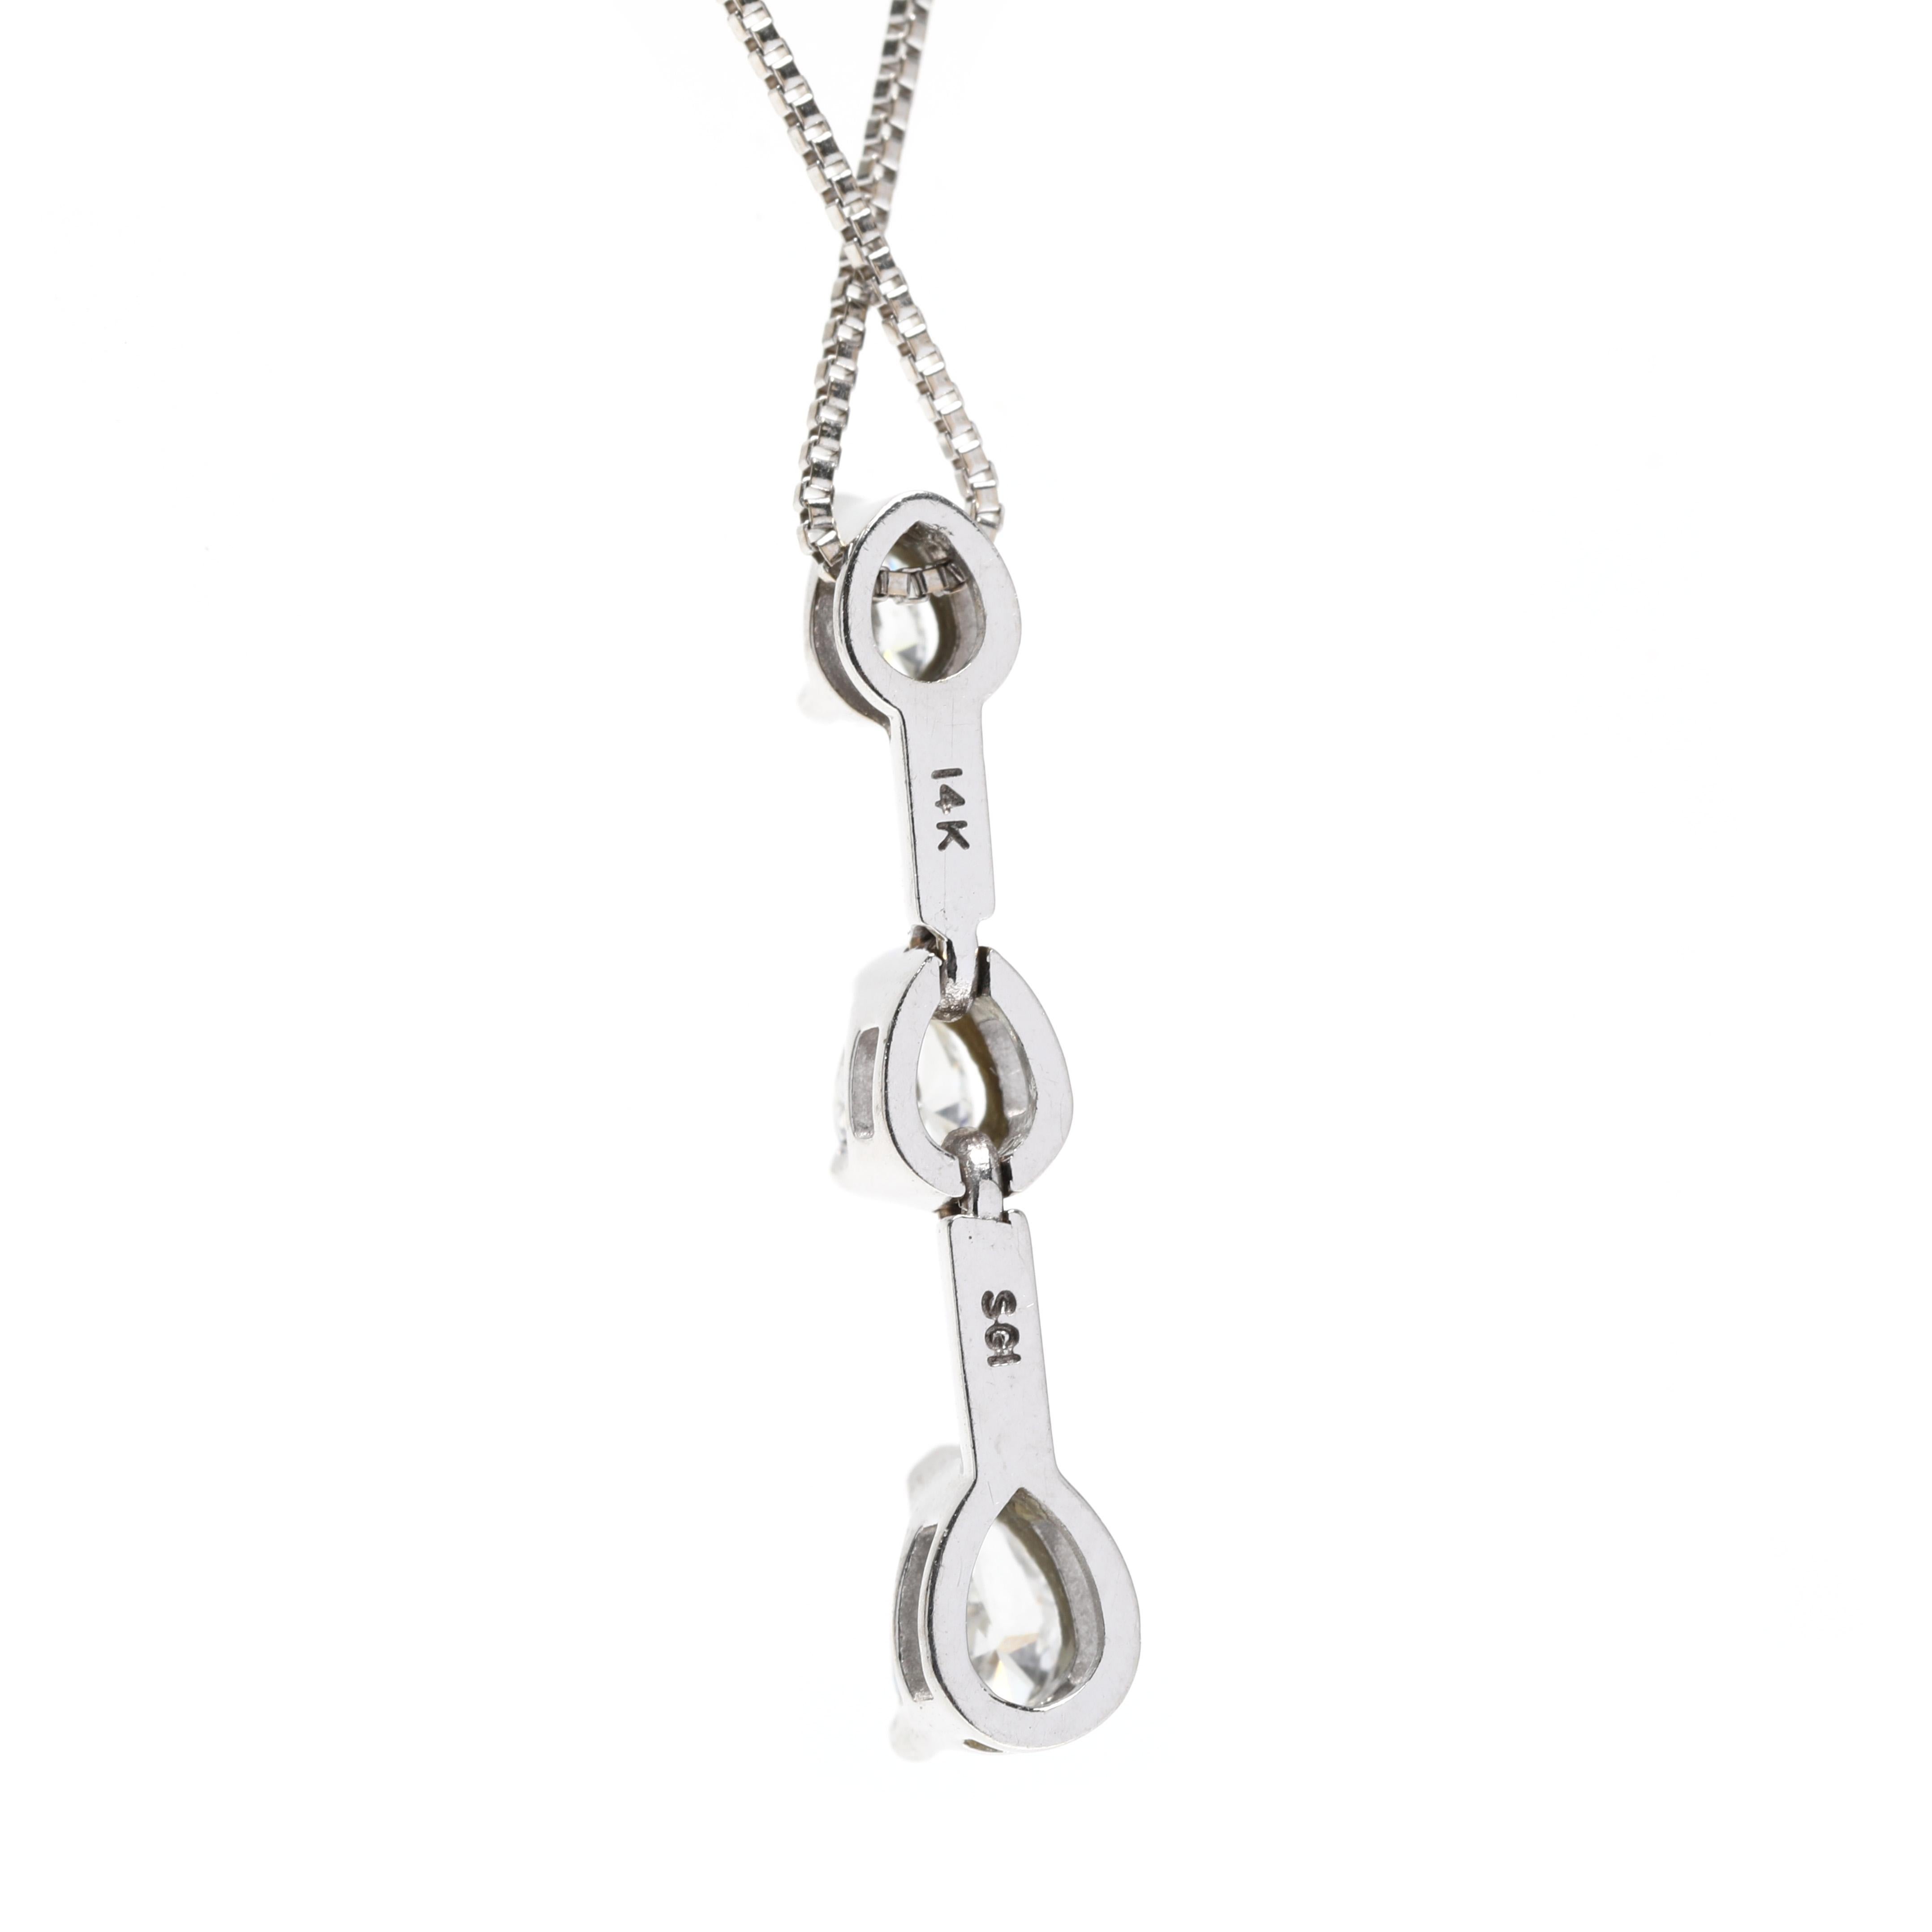 This elegant 0.50ctw pear diamond pendant necklace is the perfect addition to your wardrobe. Crafted in 14K white gold and measuring 17 inches in length, this simple vintage-style necklace is sure to become a timeless classic in your collection.